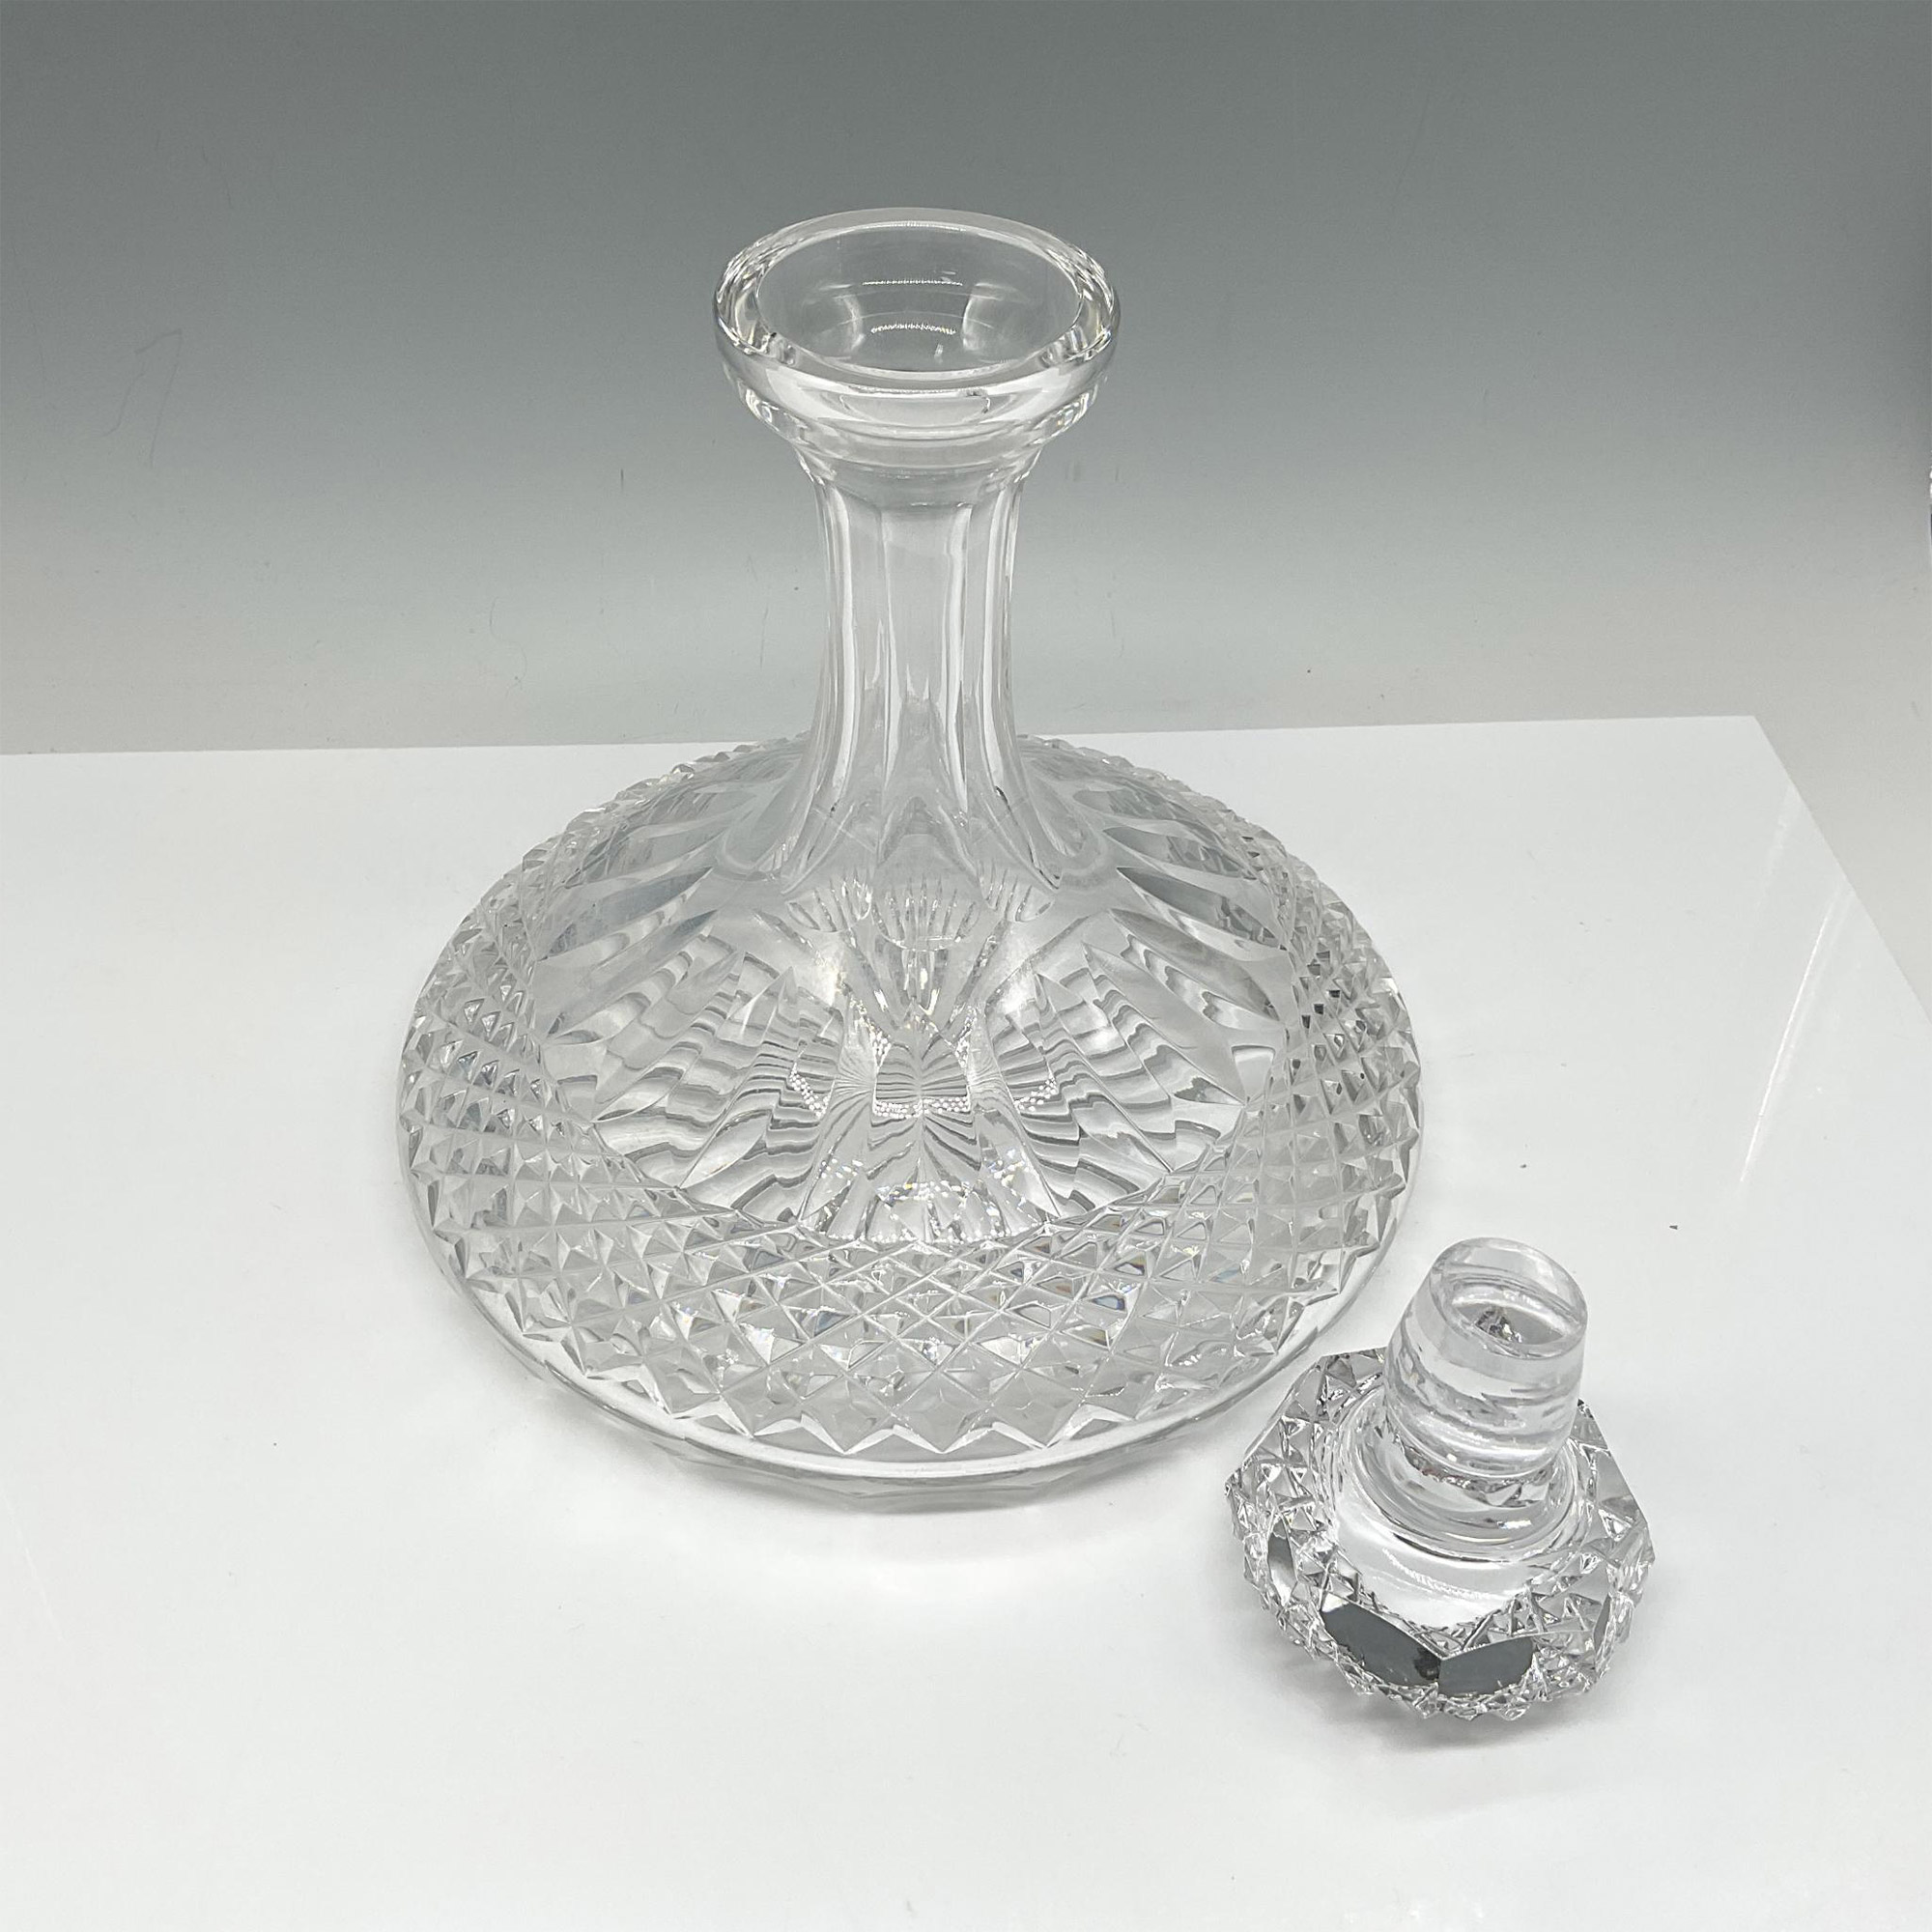 Galway Irish Crystal Decanter with Stopper - Image 3 of 4